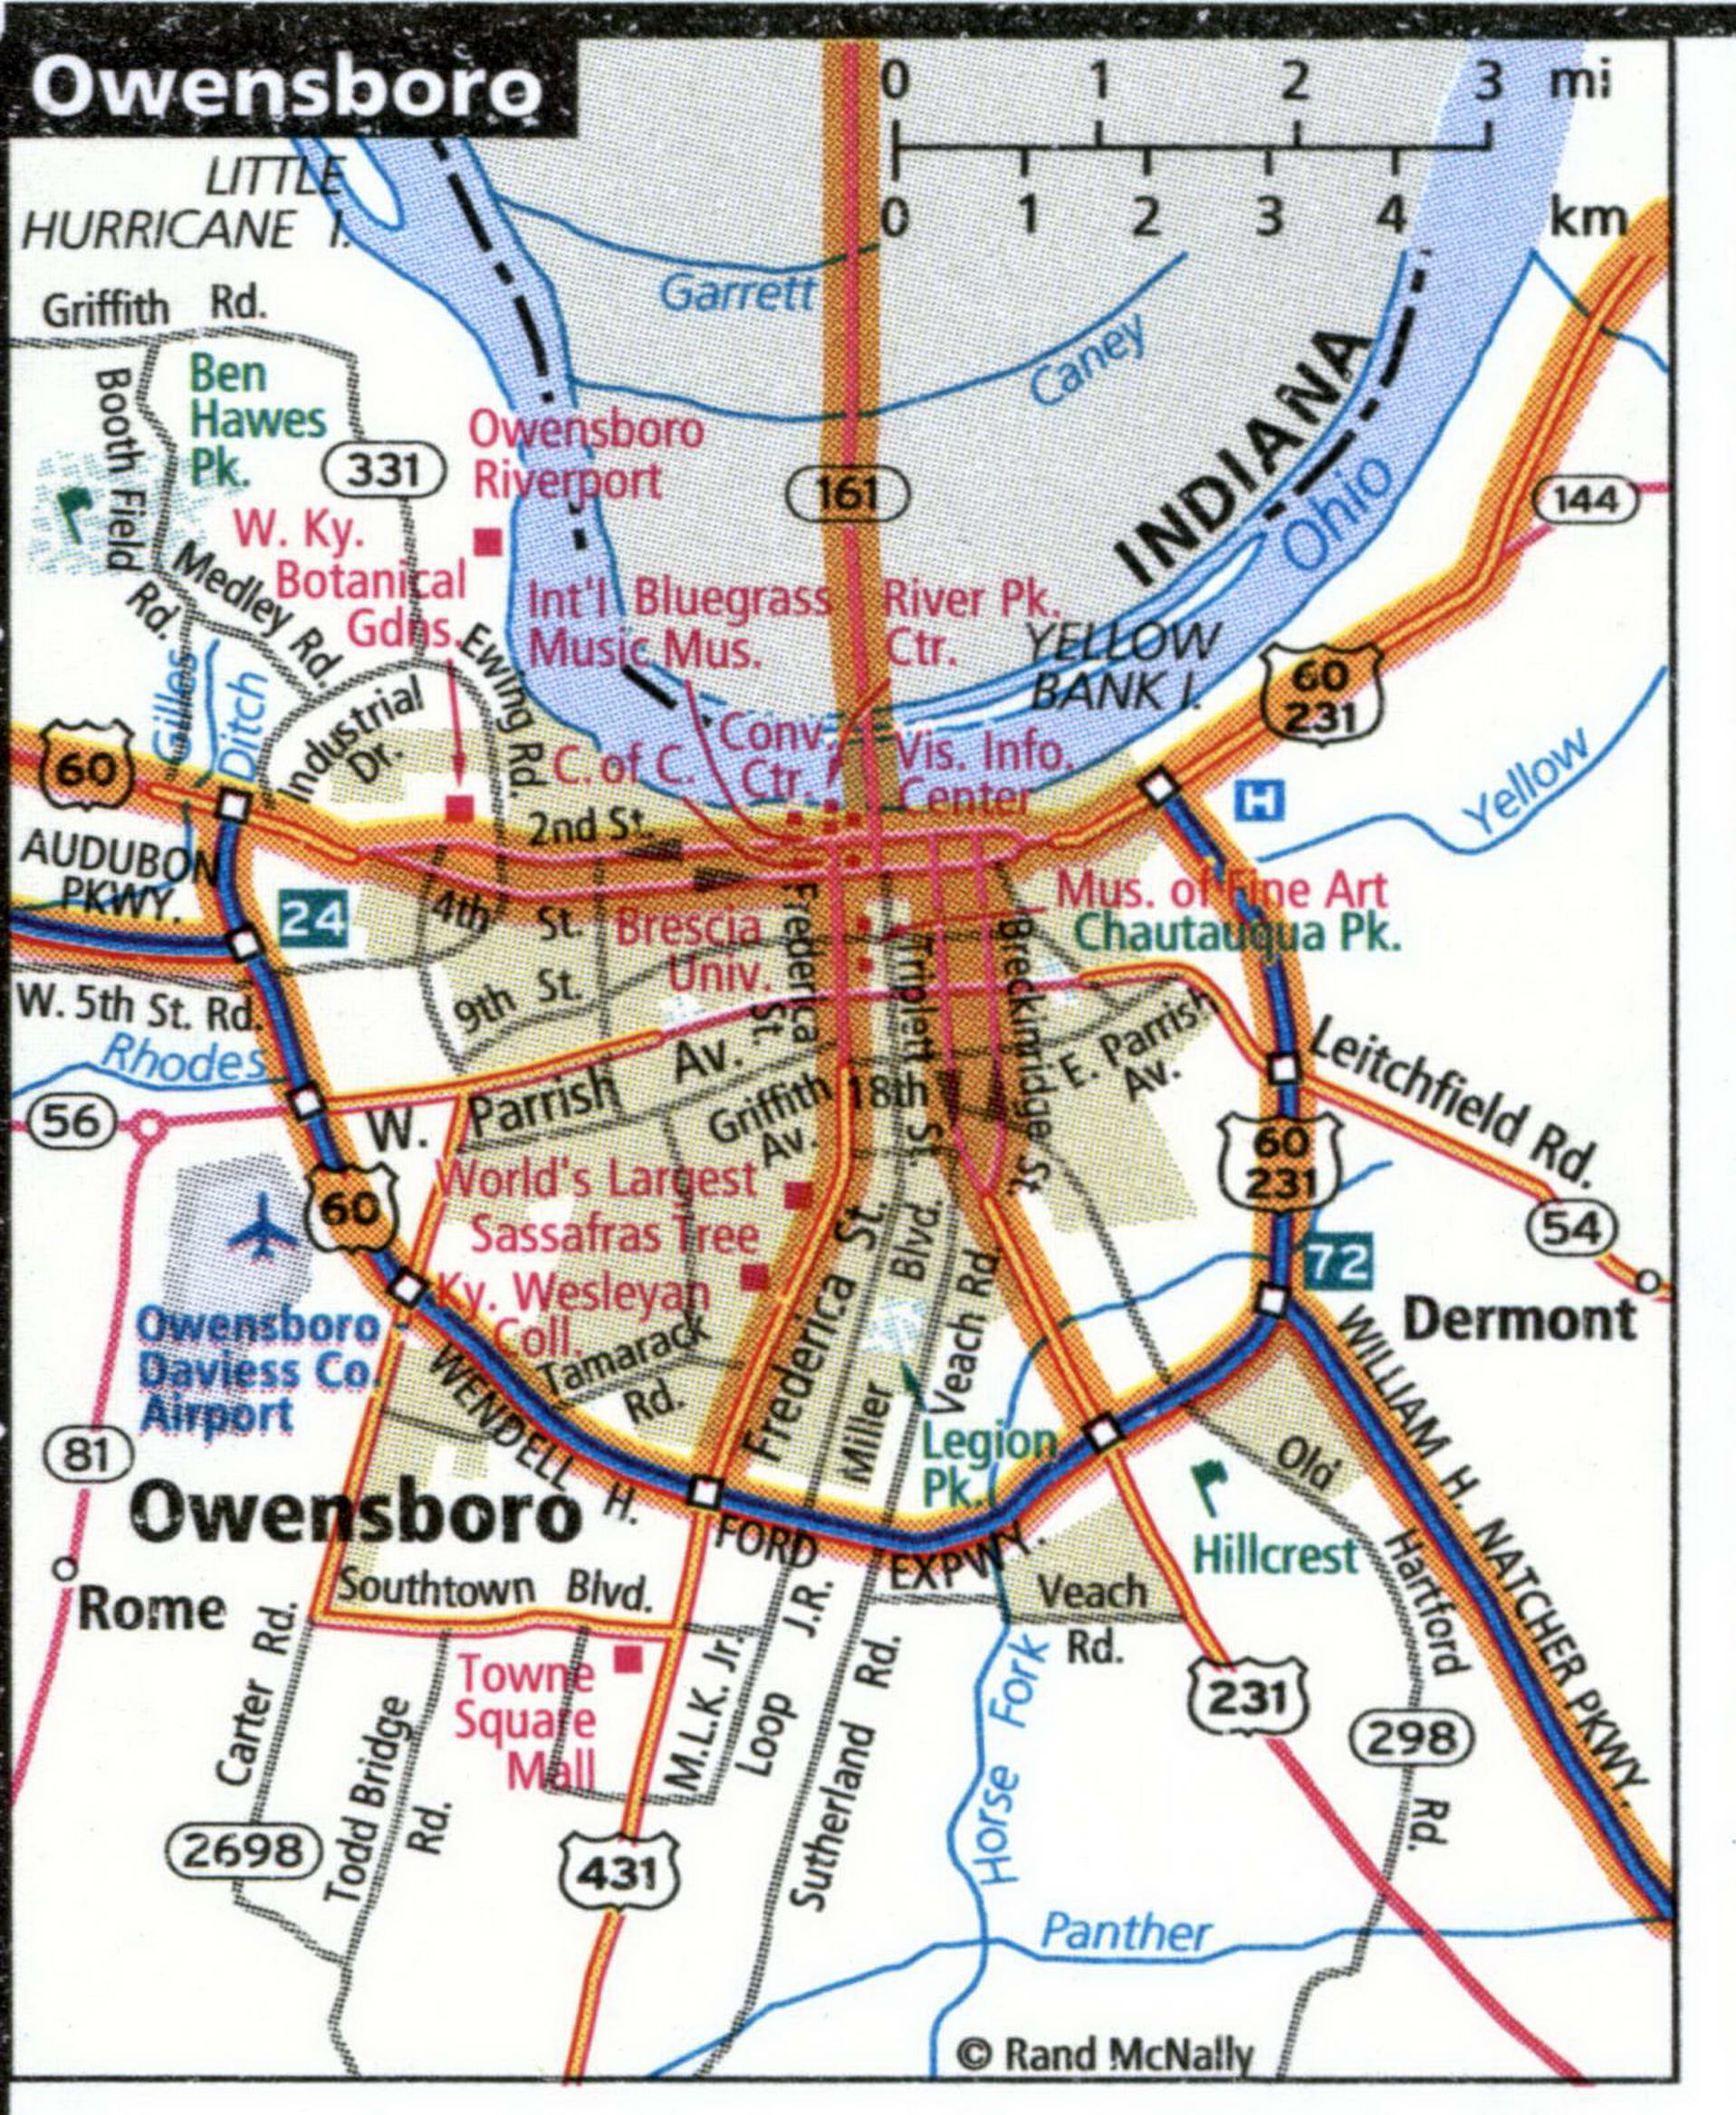 Owensboro map for truckers